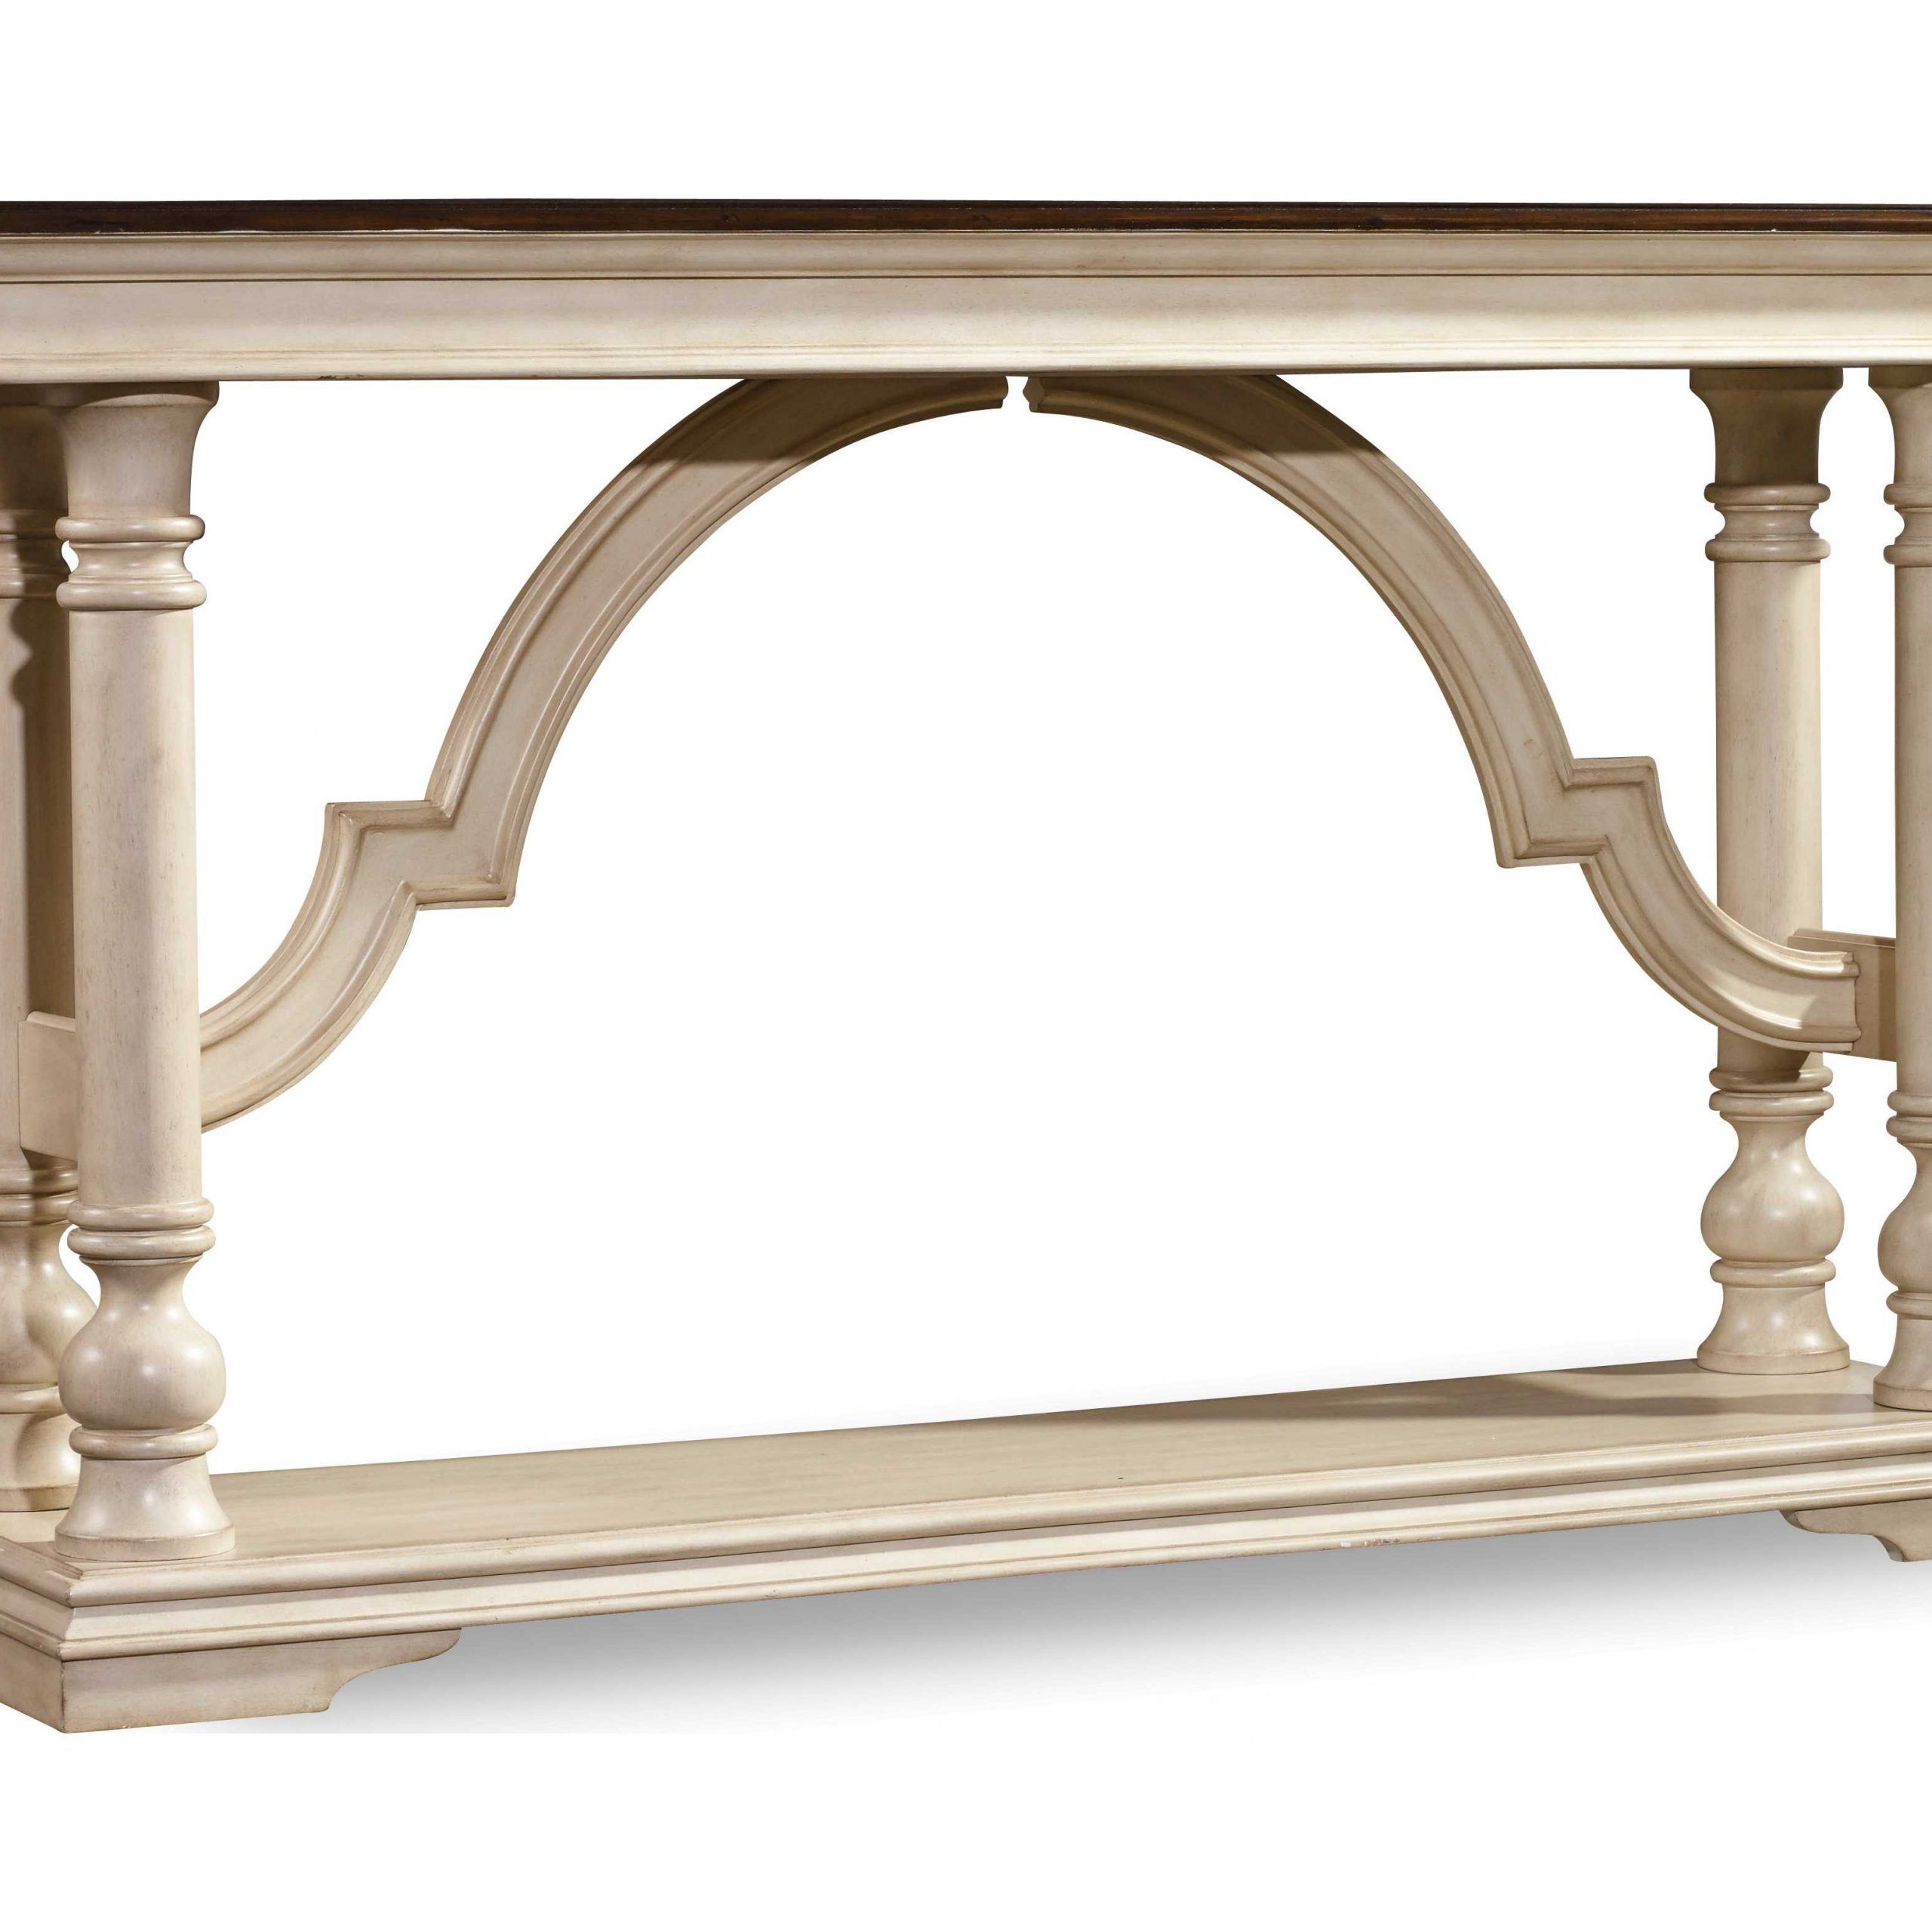 Hooker Furniture Leesburg Features An Accent Finish Intended For Antiqued Gold Rectangular Console Tables (View 20 of 20)